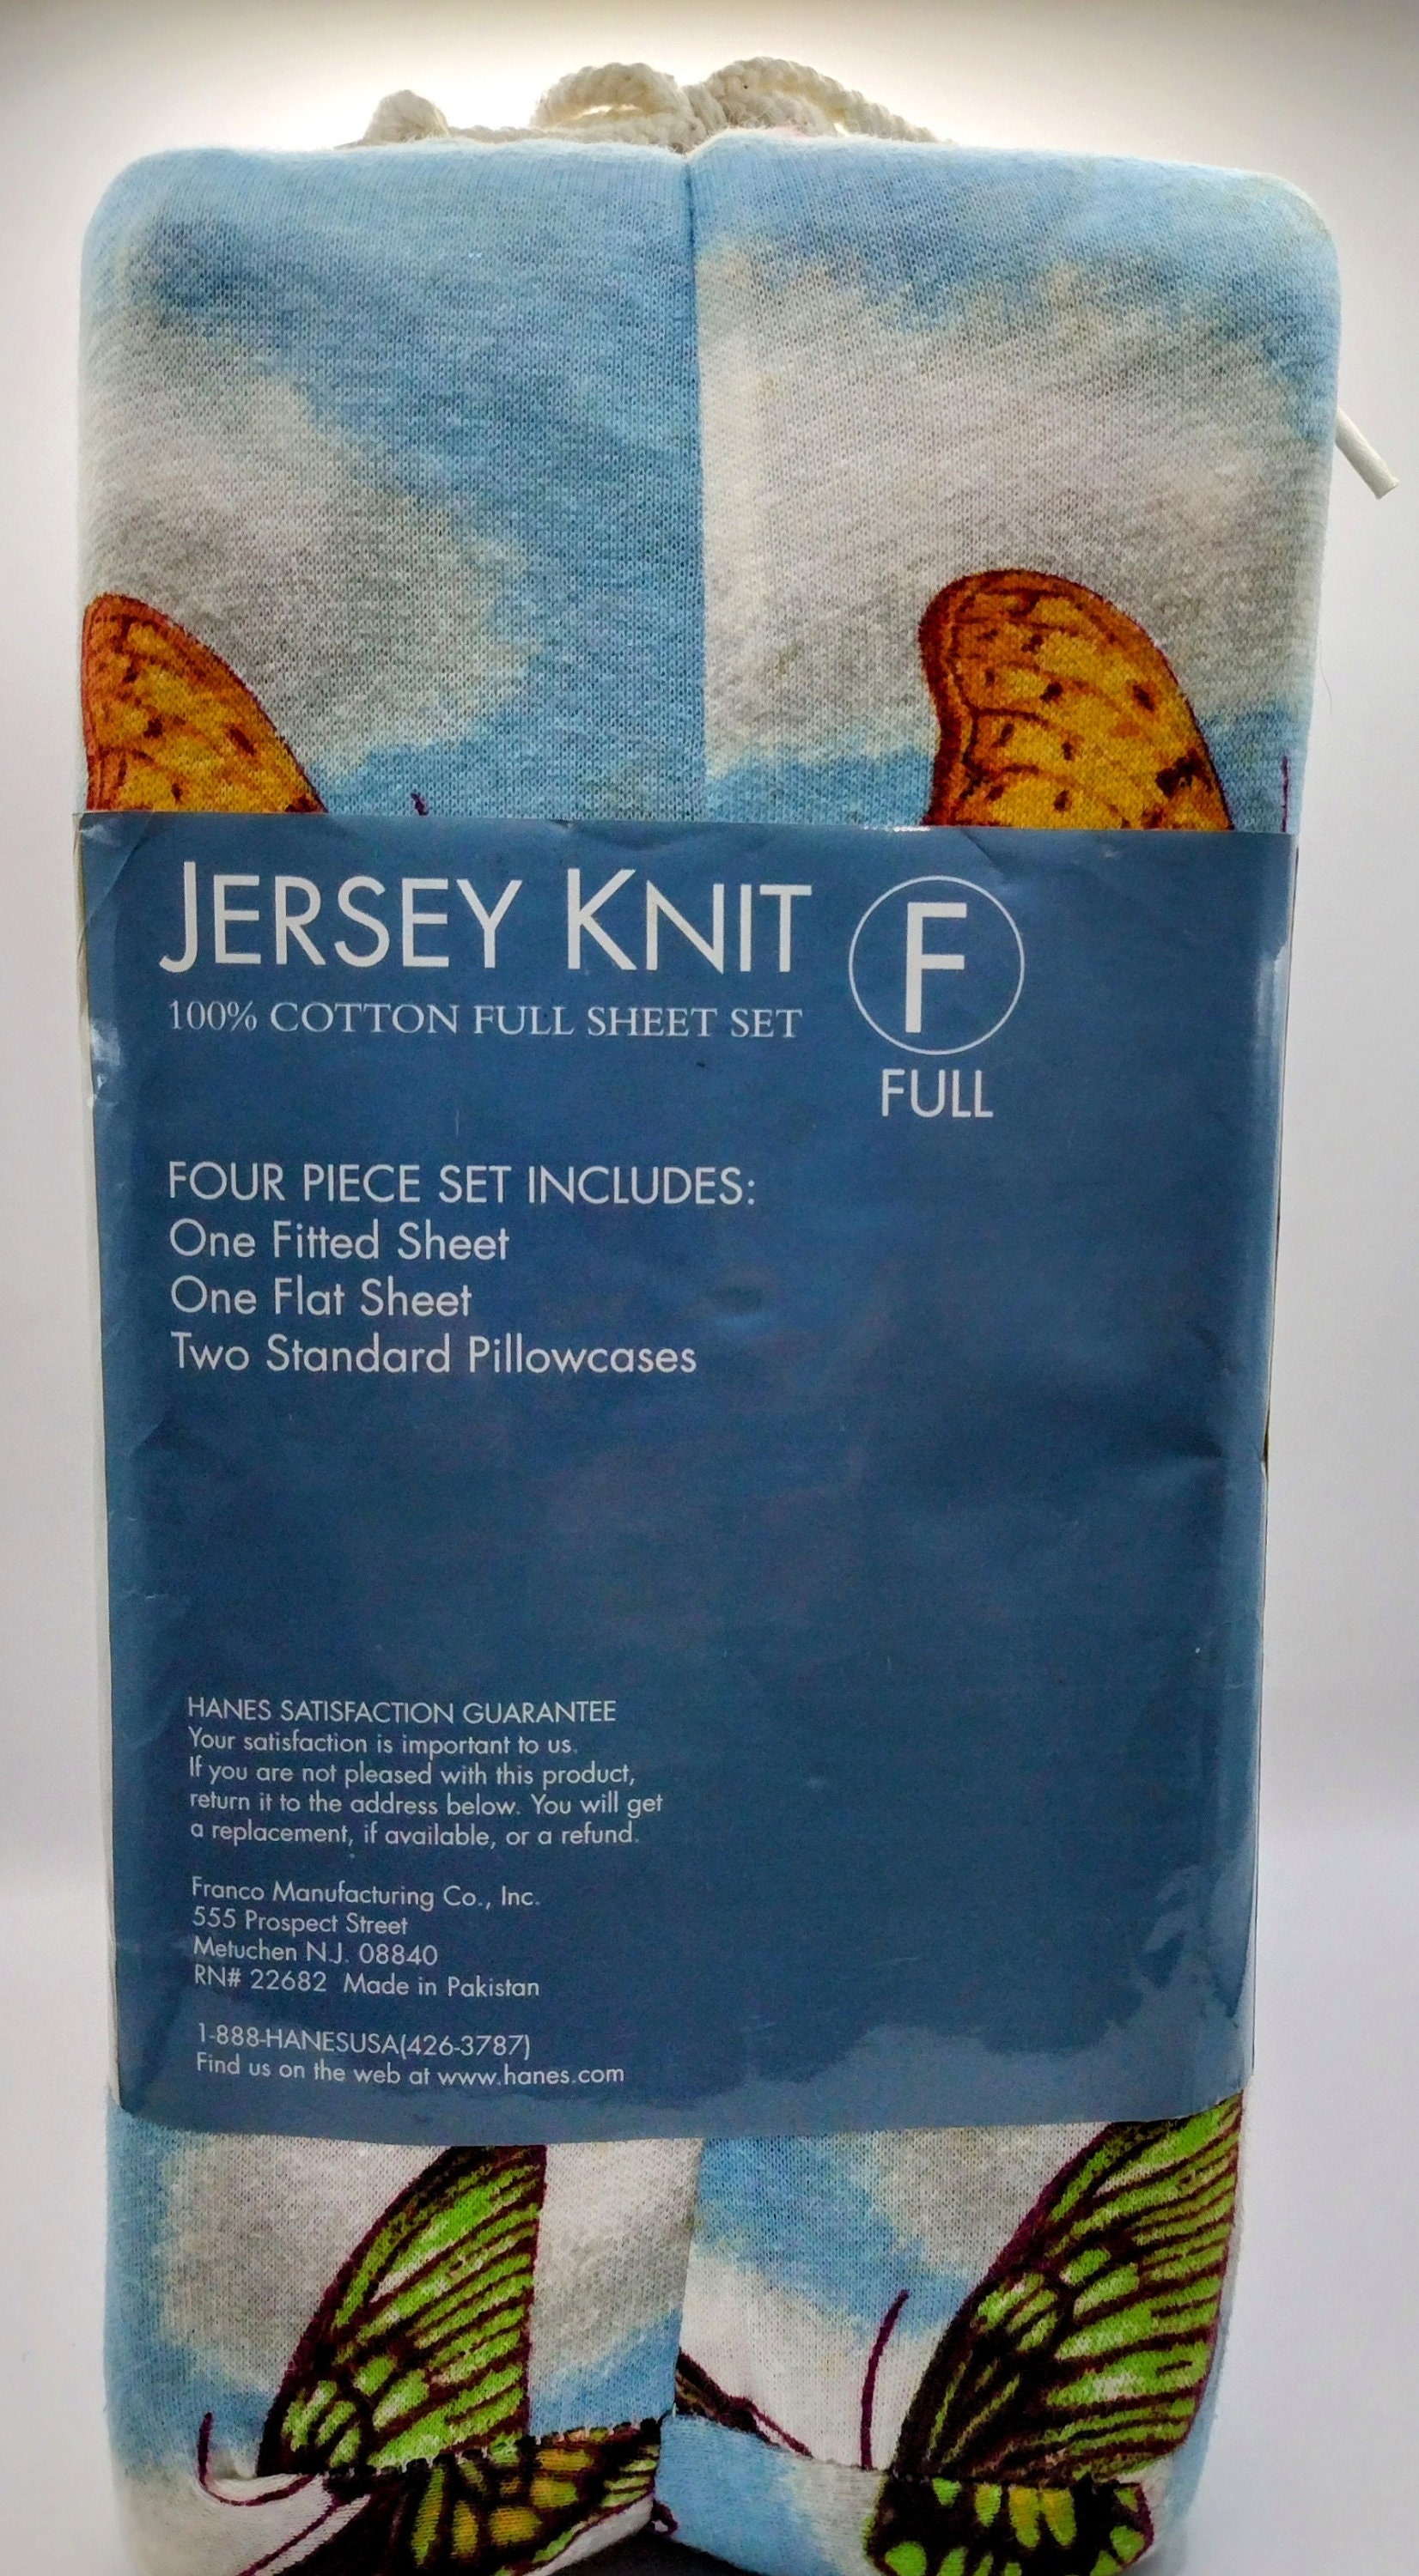 Vintage Inspired Hanes Jersey Knit Full Sheets Set. Butterfly